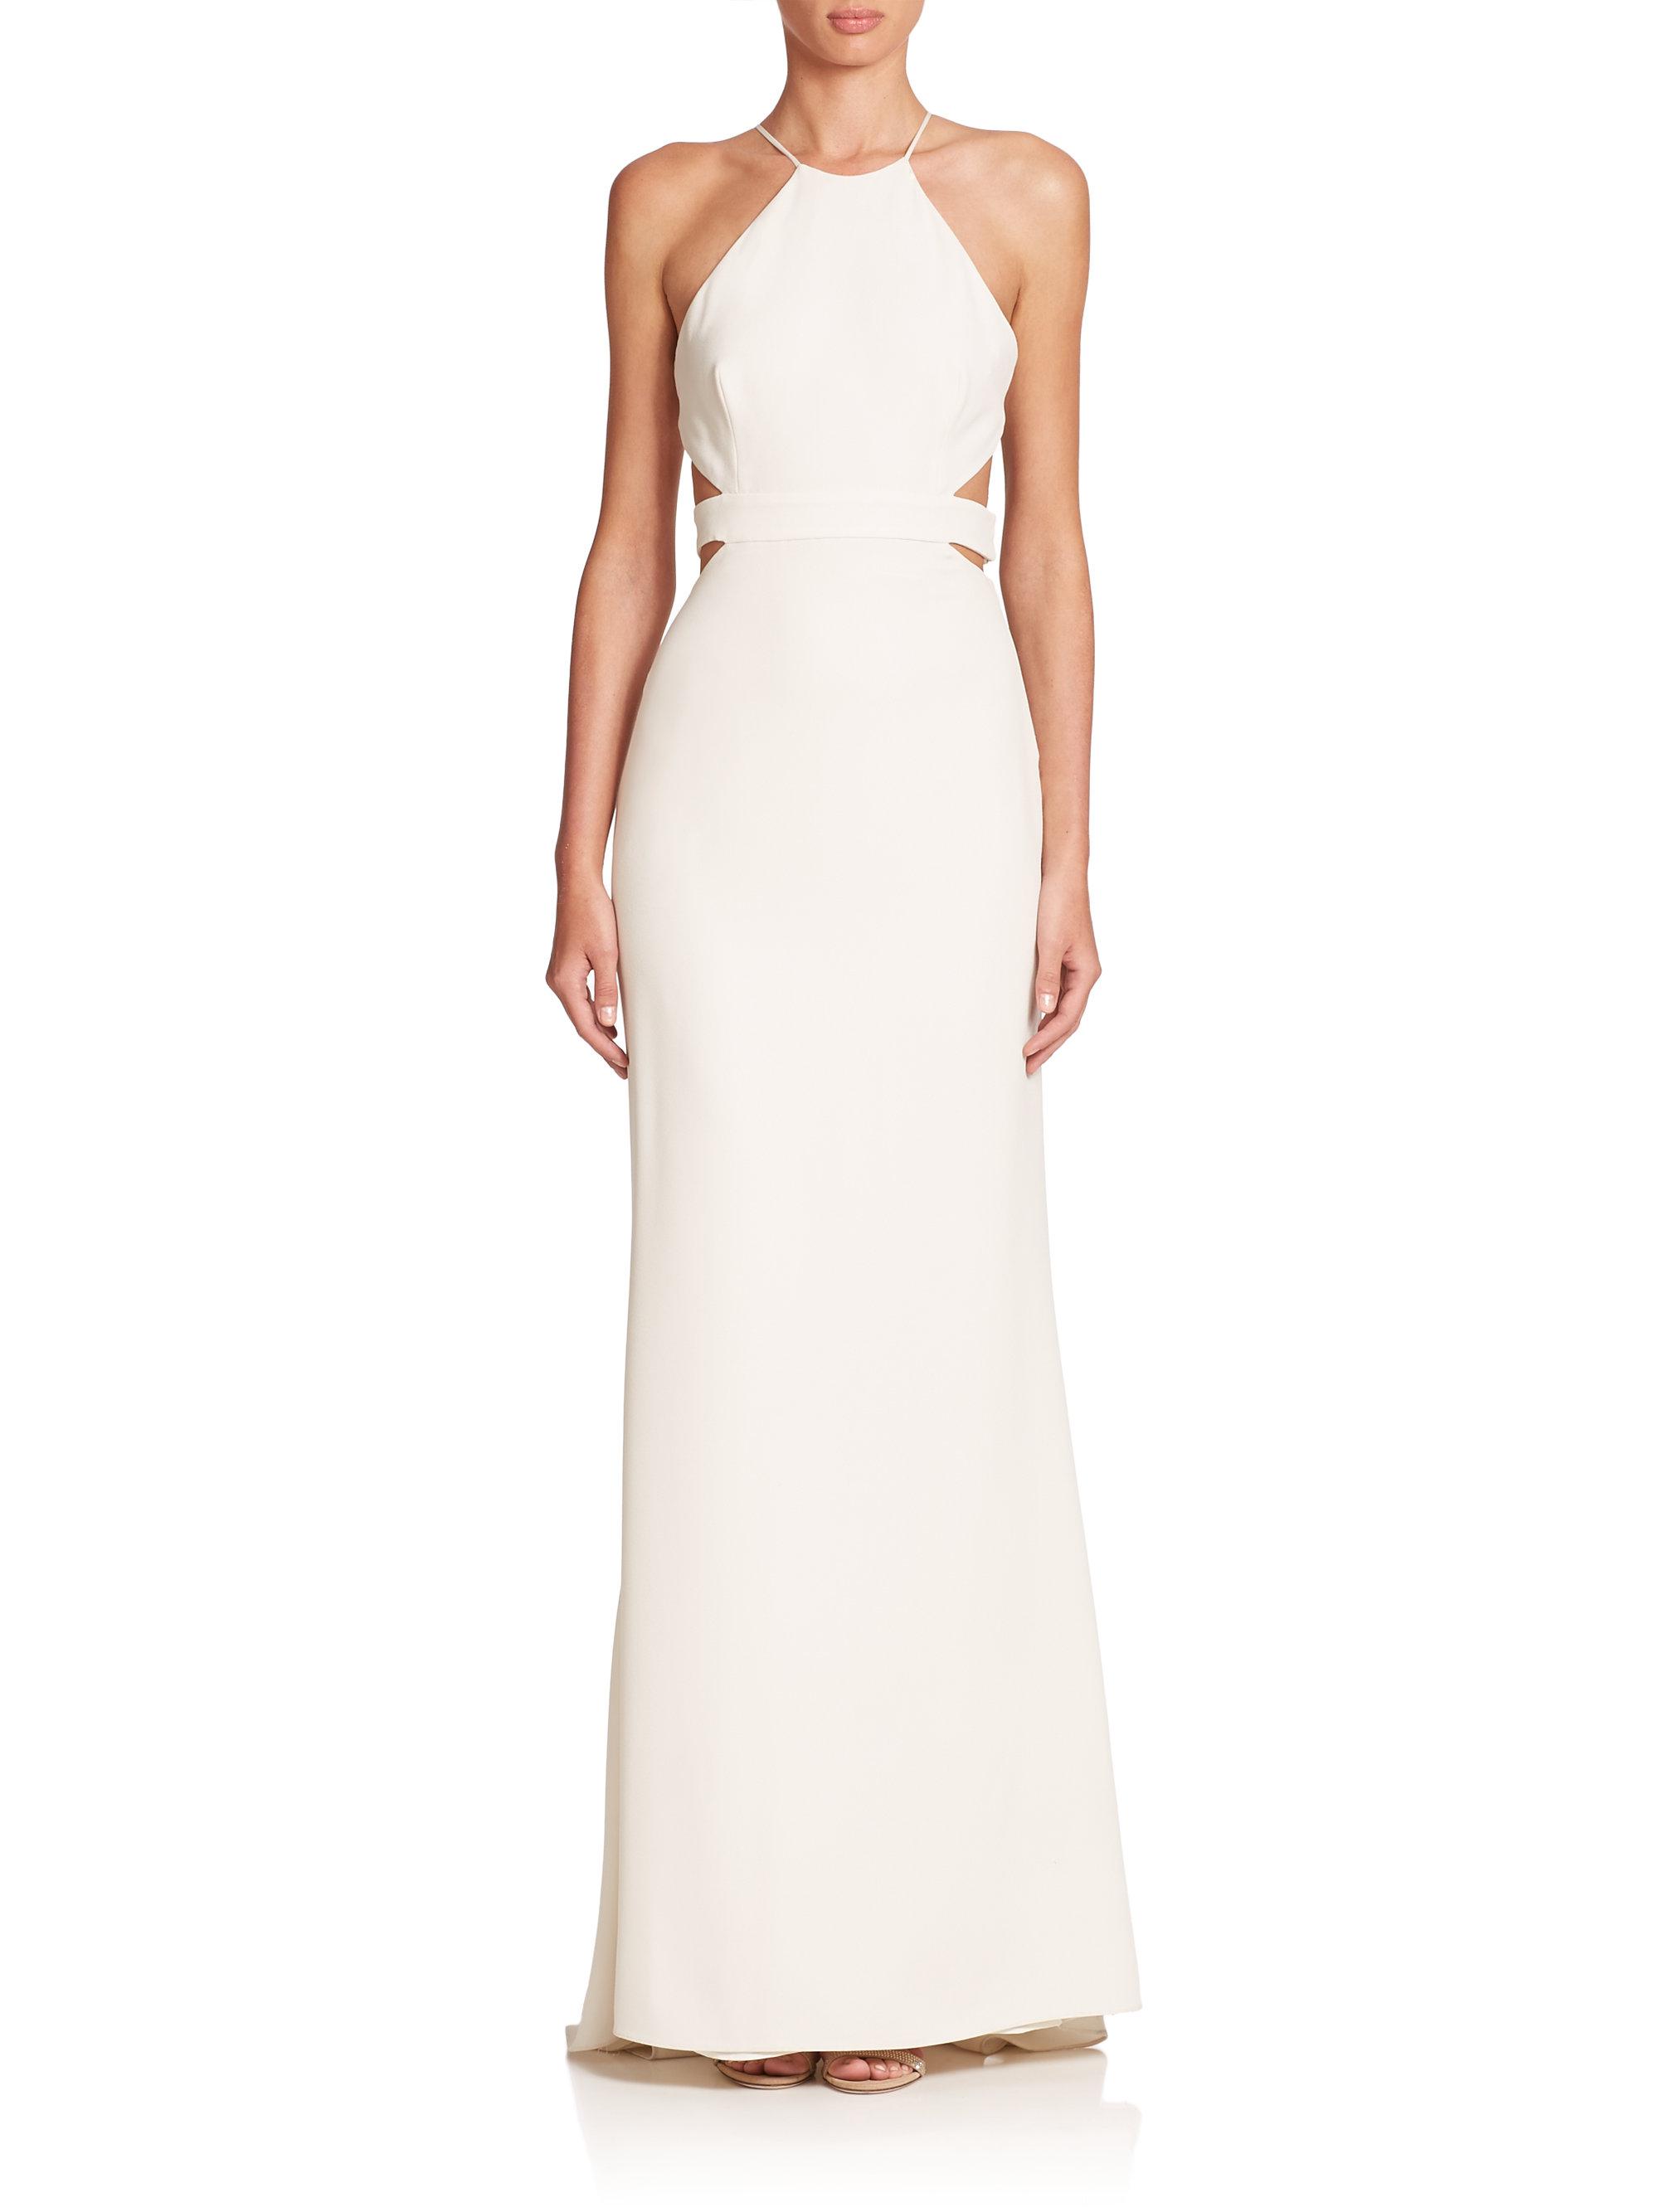 Lyst - Halston heritage Cutout-back Halter Gown in White